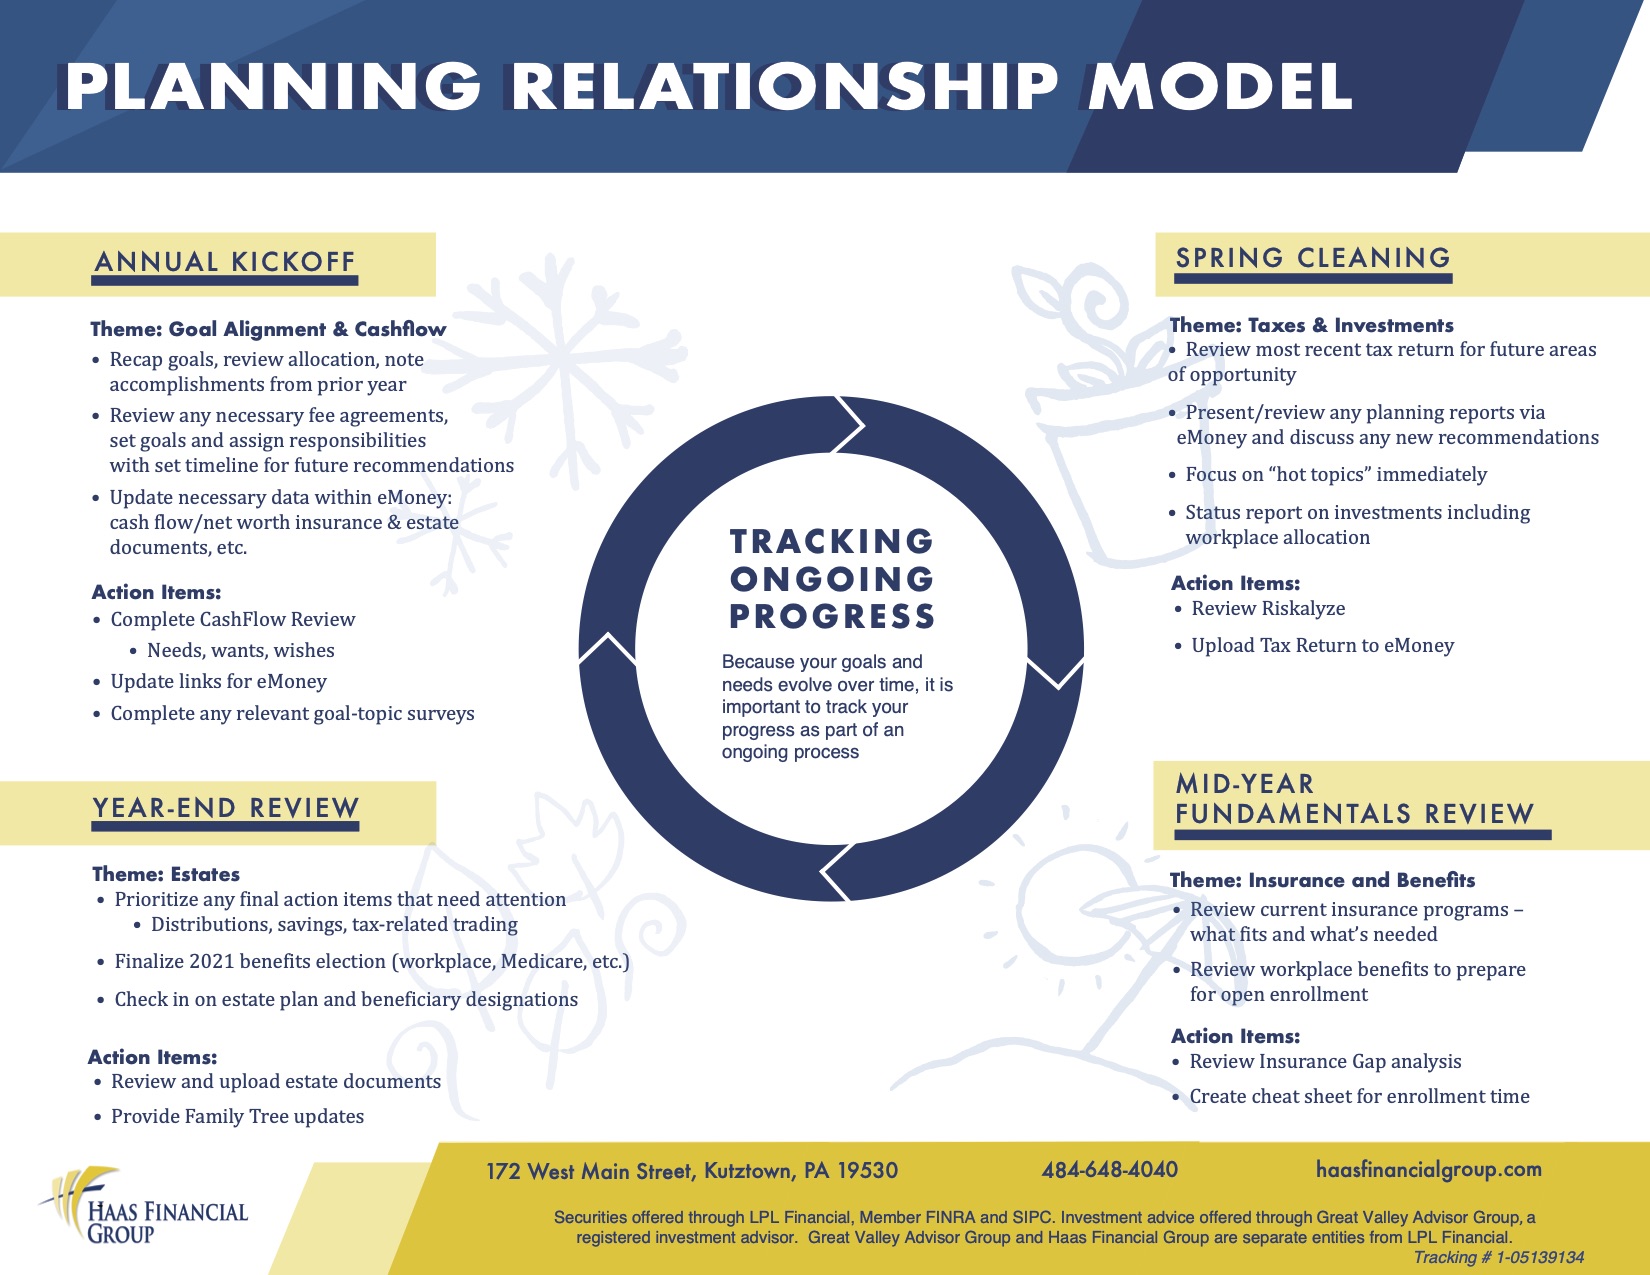 Investment Planning Relationship Model | HAAS Financial Group